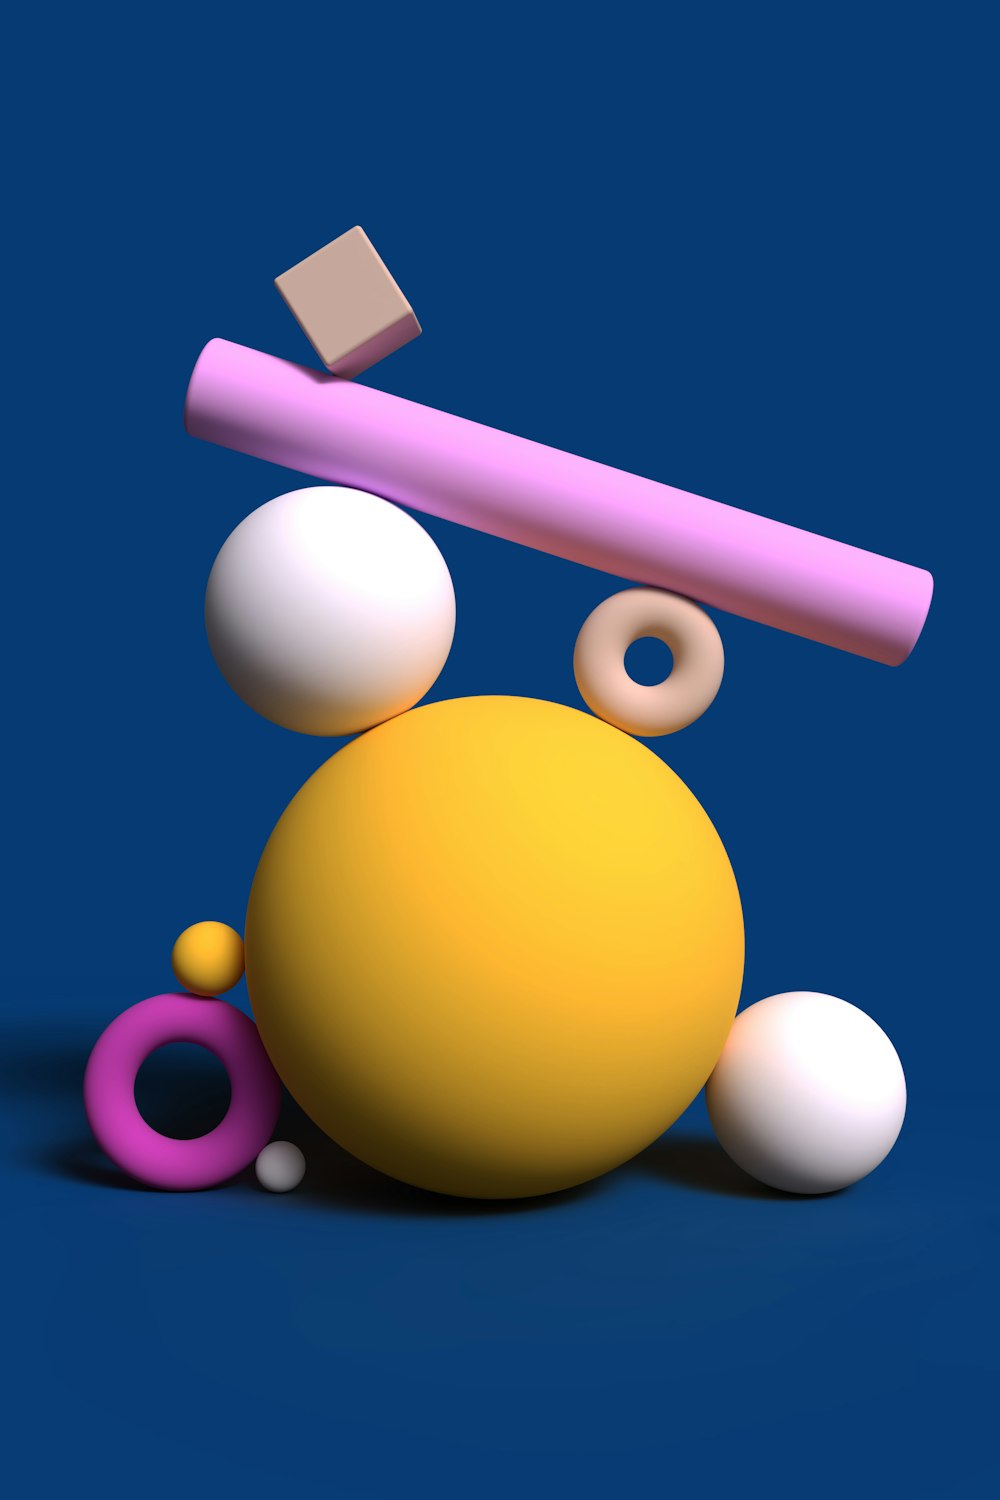 a yellow ball and a pink object on a blue background